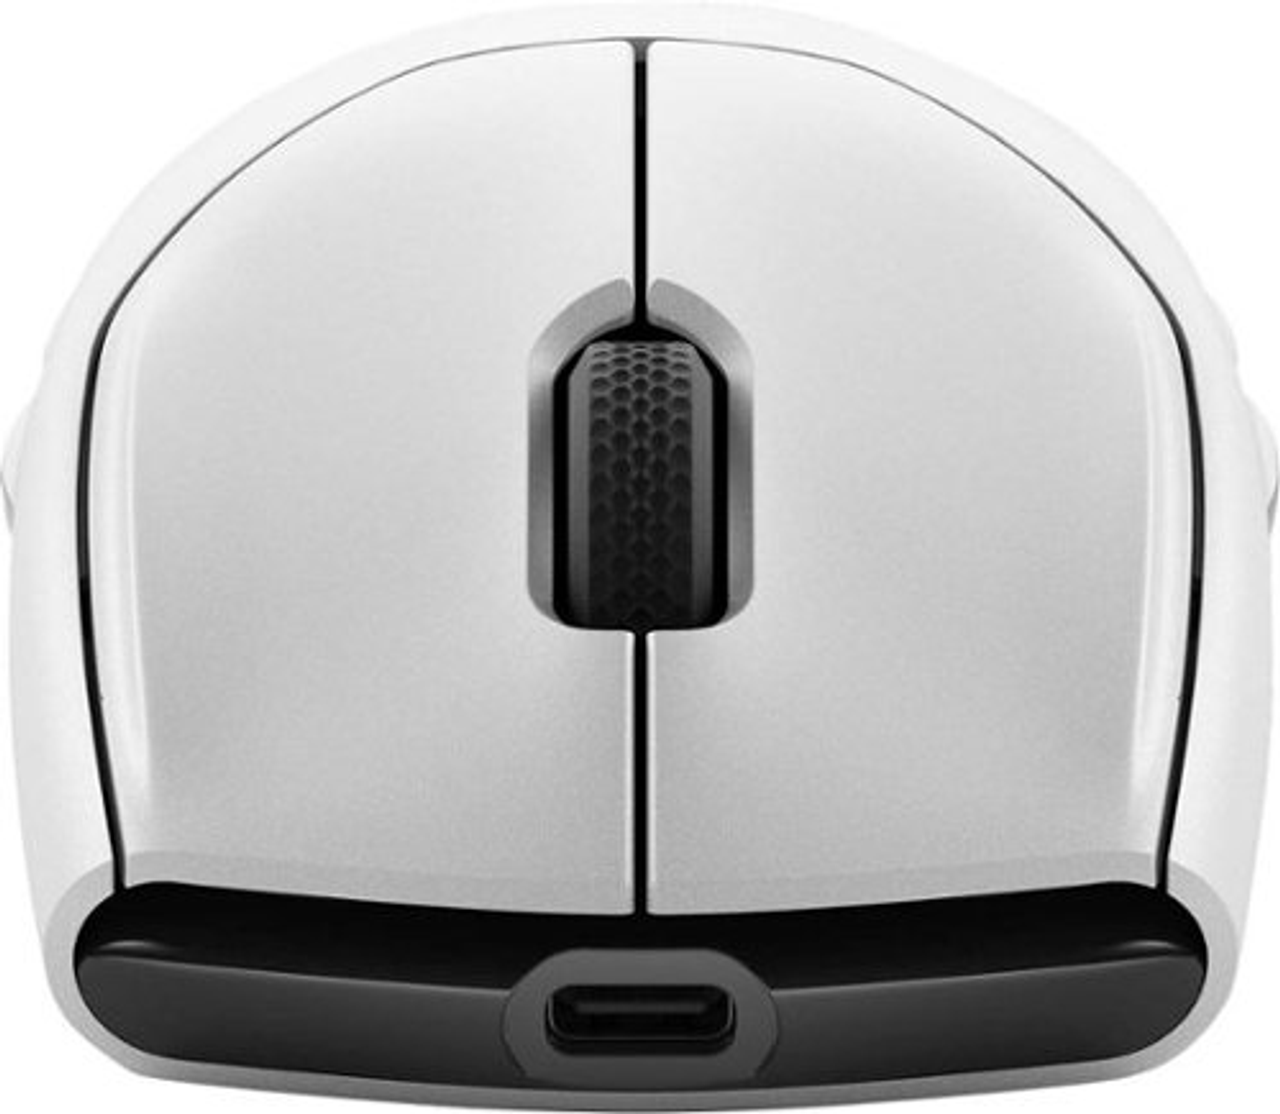 Dell - Alienware Tri-Mode Wireless Gaming Mouse - AW720M - Lunar Light - Lunar light